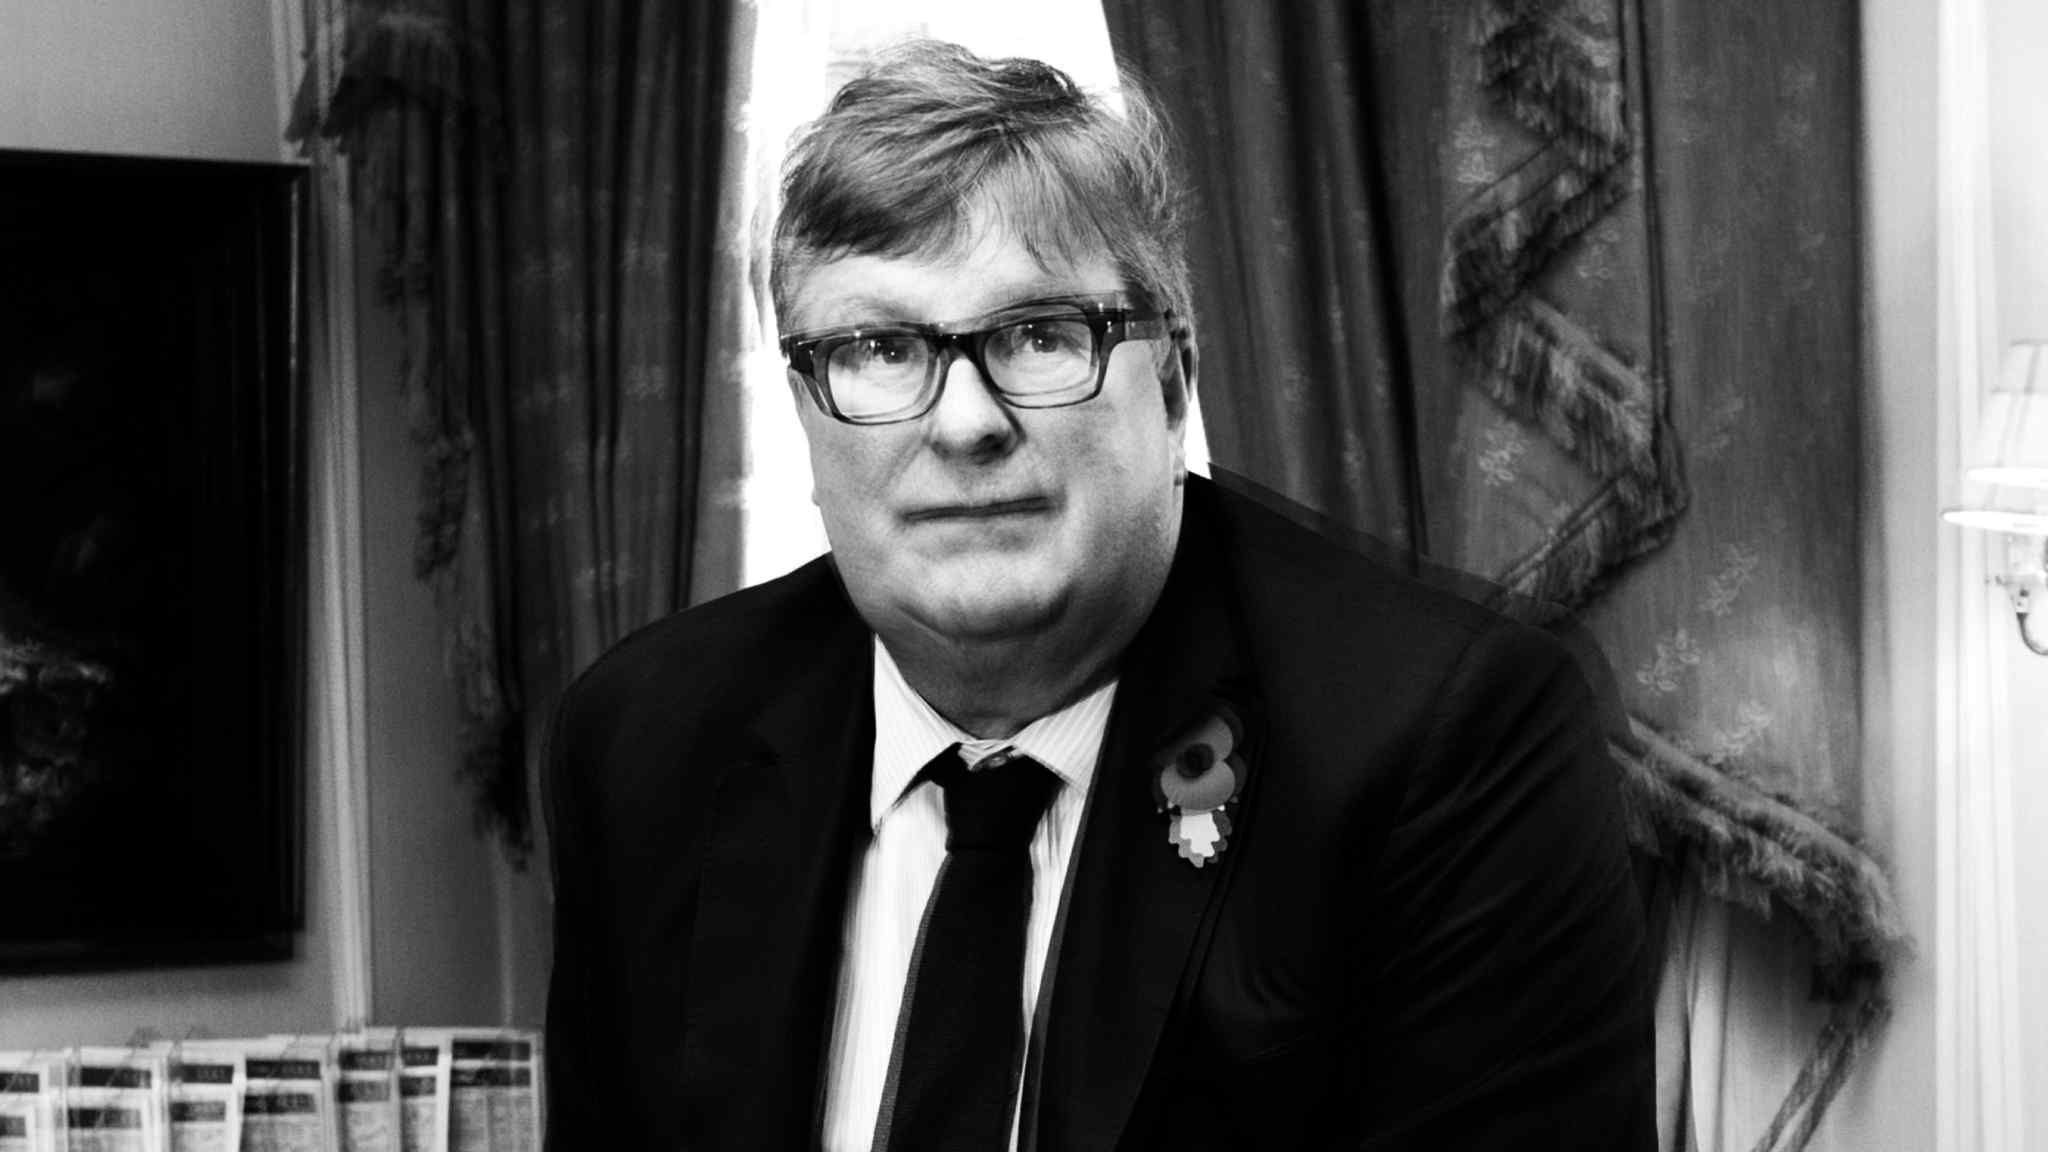 How Crispin Odey evaded sexual assault allegations for decades